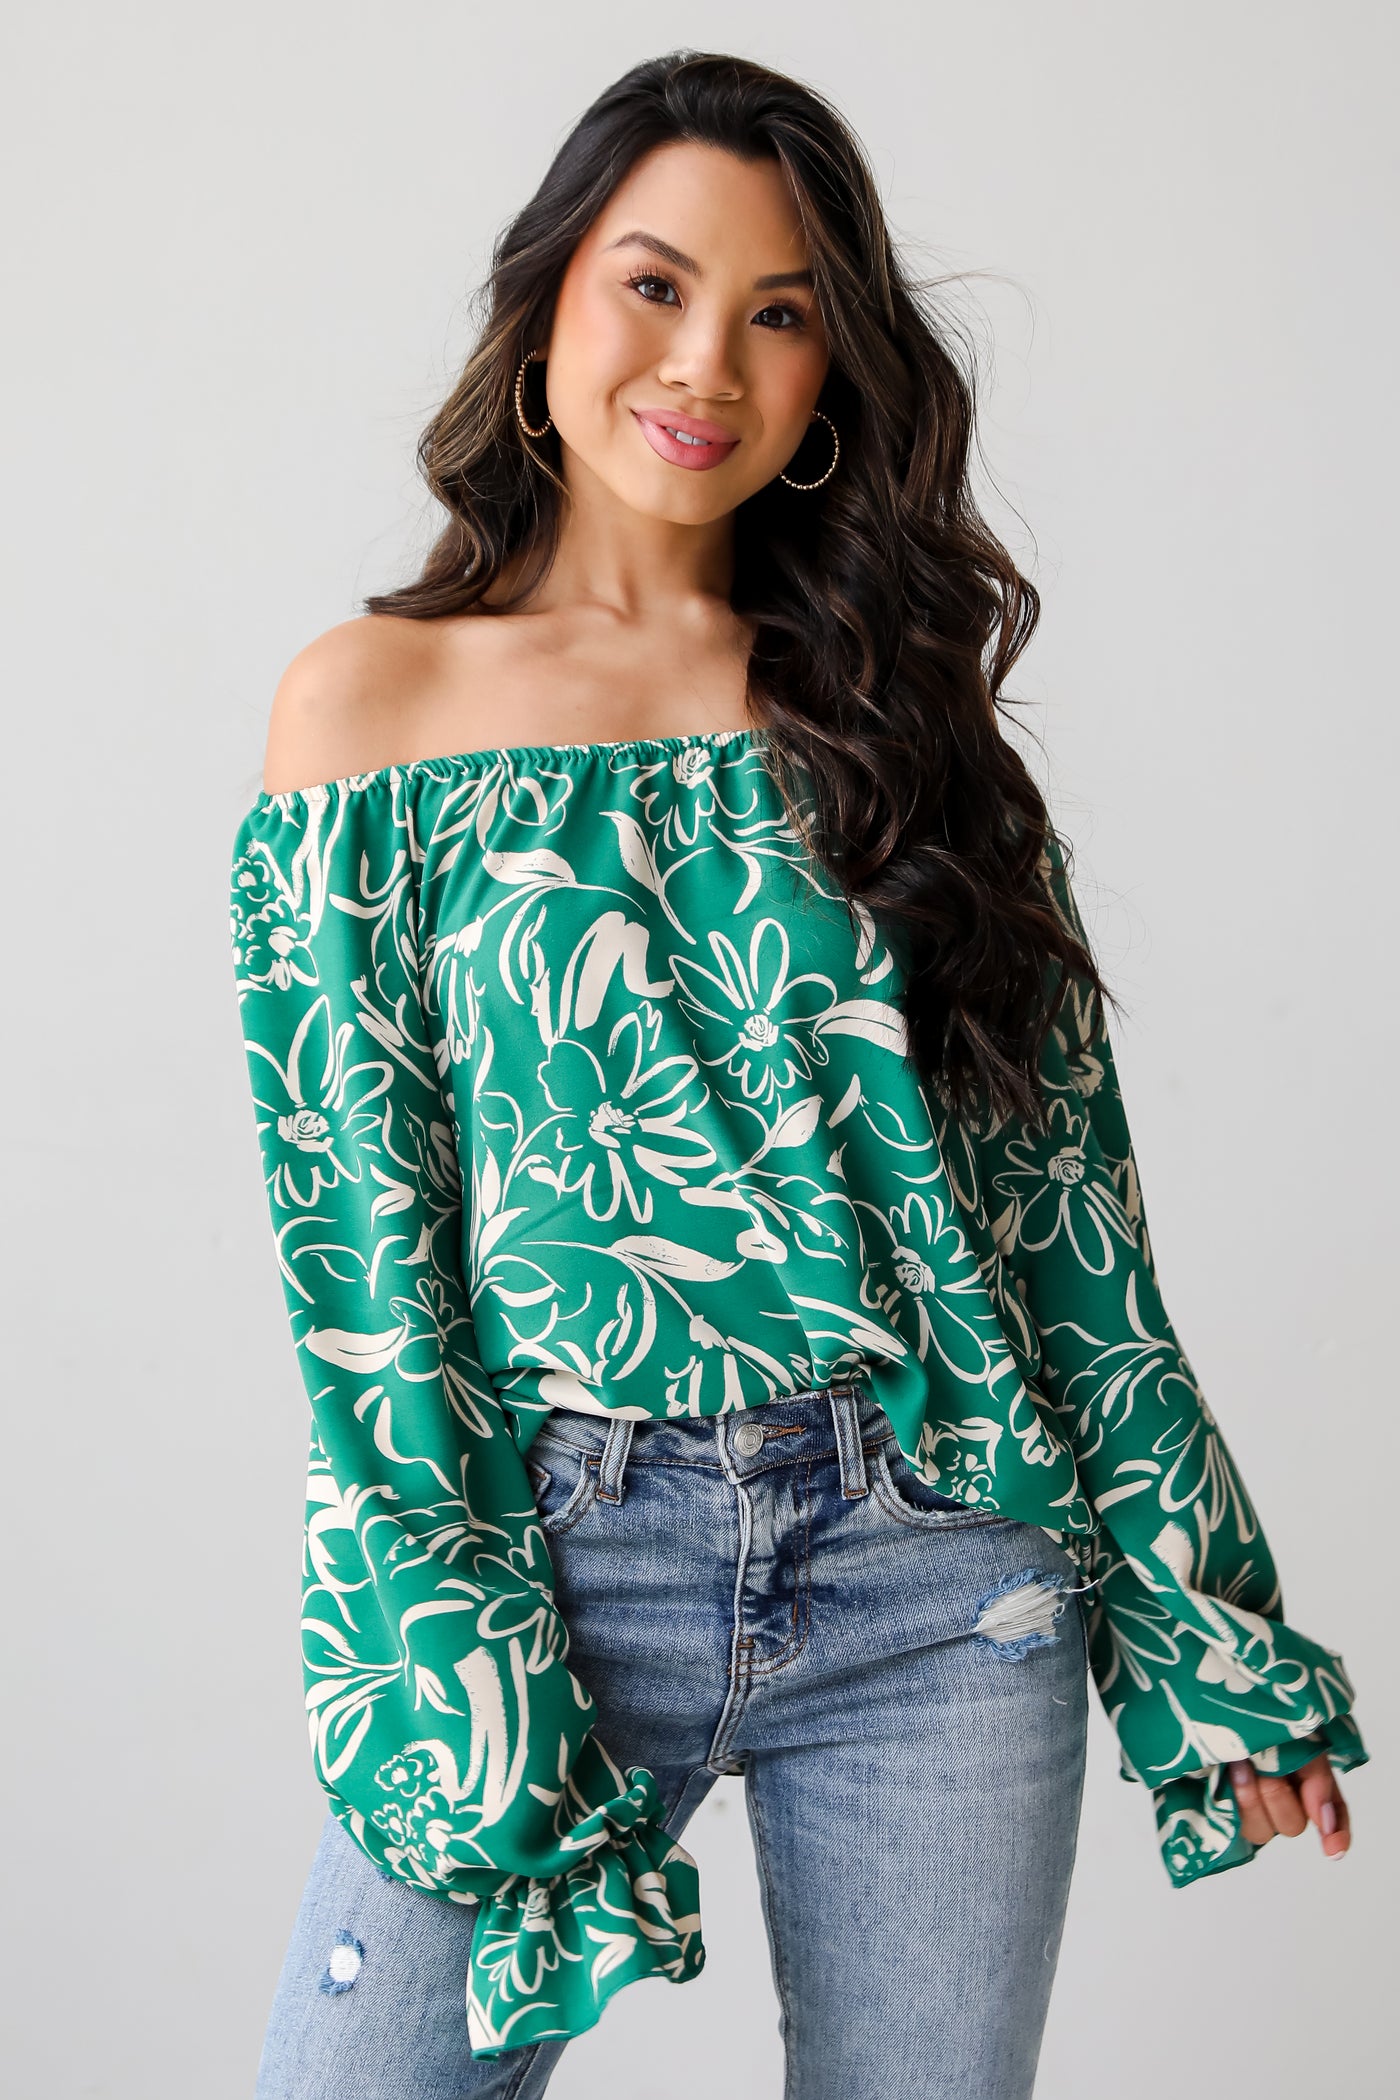 Darling Quality Green Floral Blouse floral tops